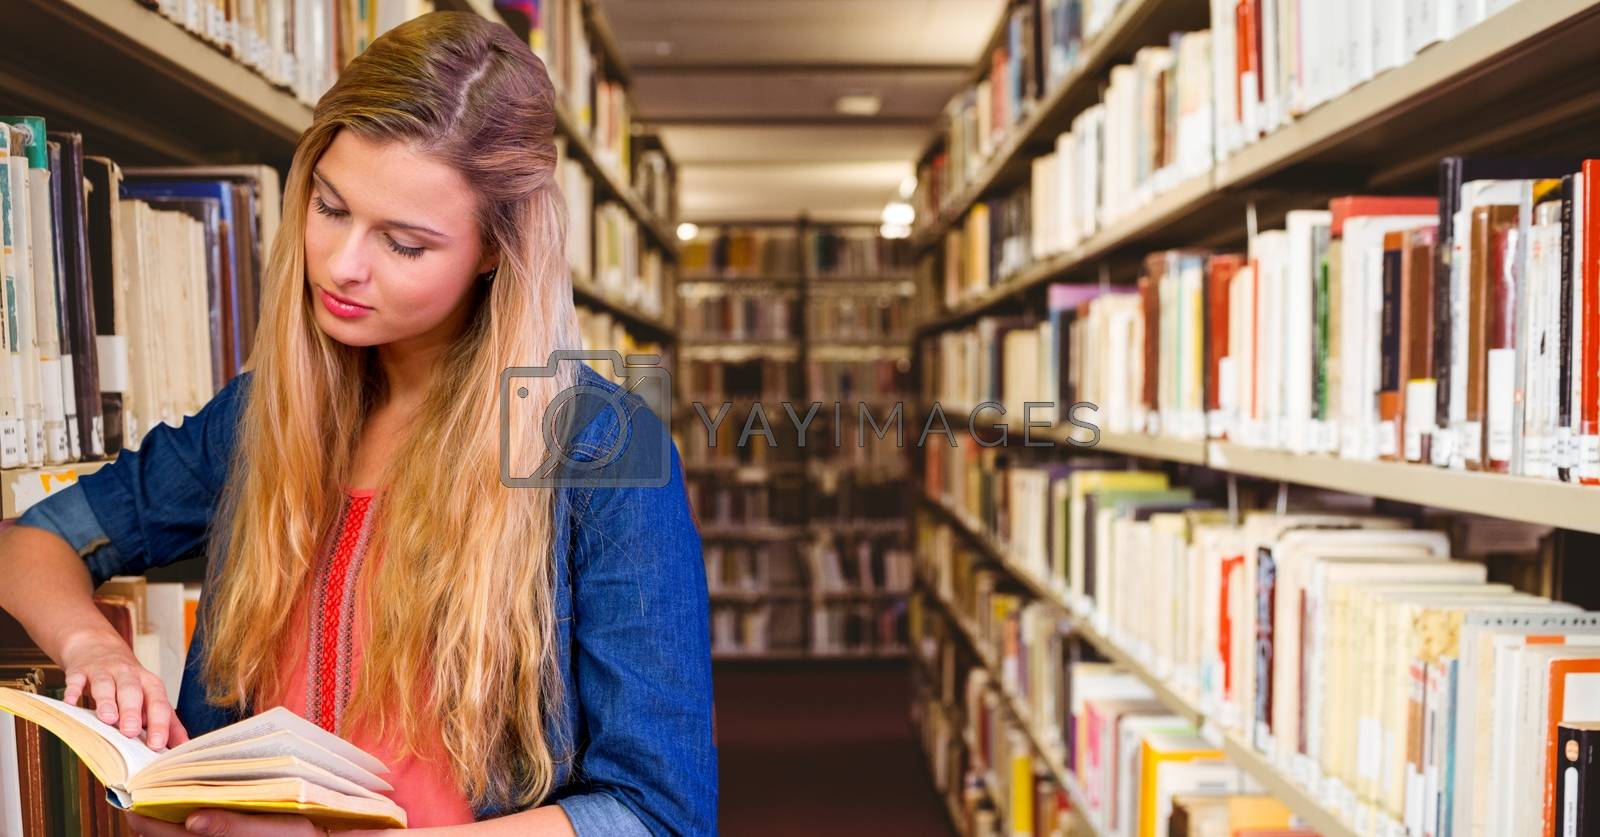 Royalty free image of Student woman in education library by Wavebreakmedia